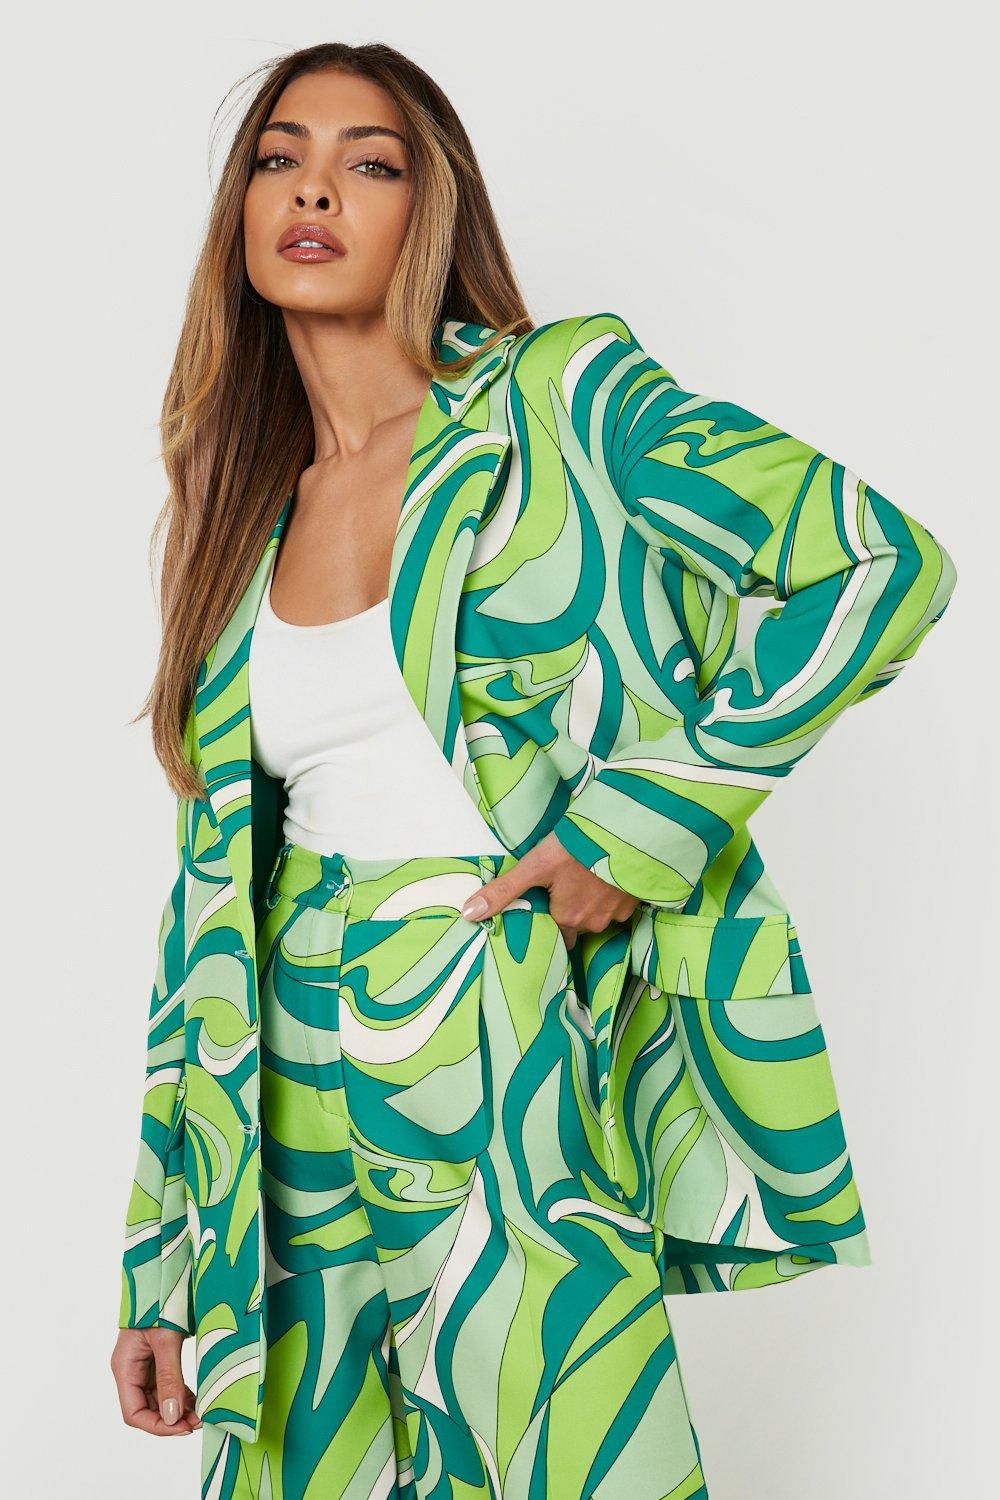 70s Outfits – 70s Style Ideas for Women Womens Abstract Print Tailored Blazer - Green - 10 $27.20 AT vintagedancer.com